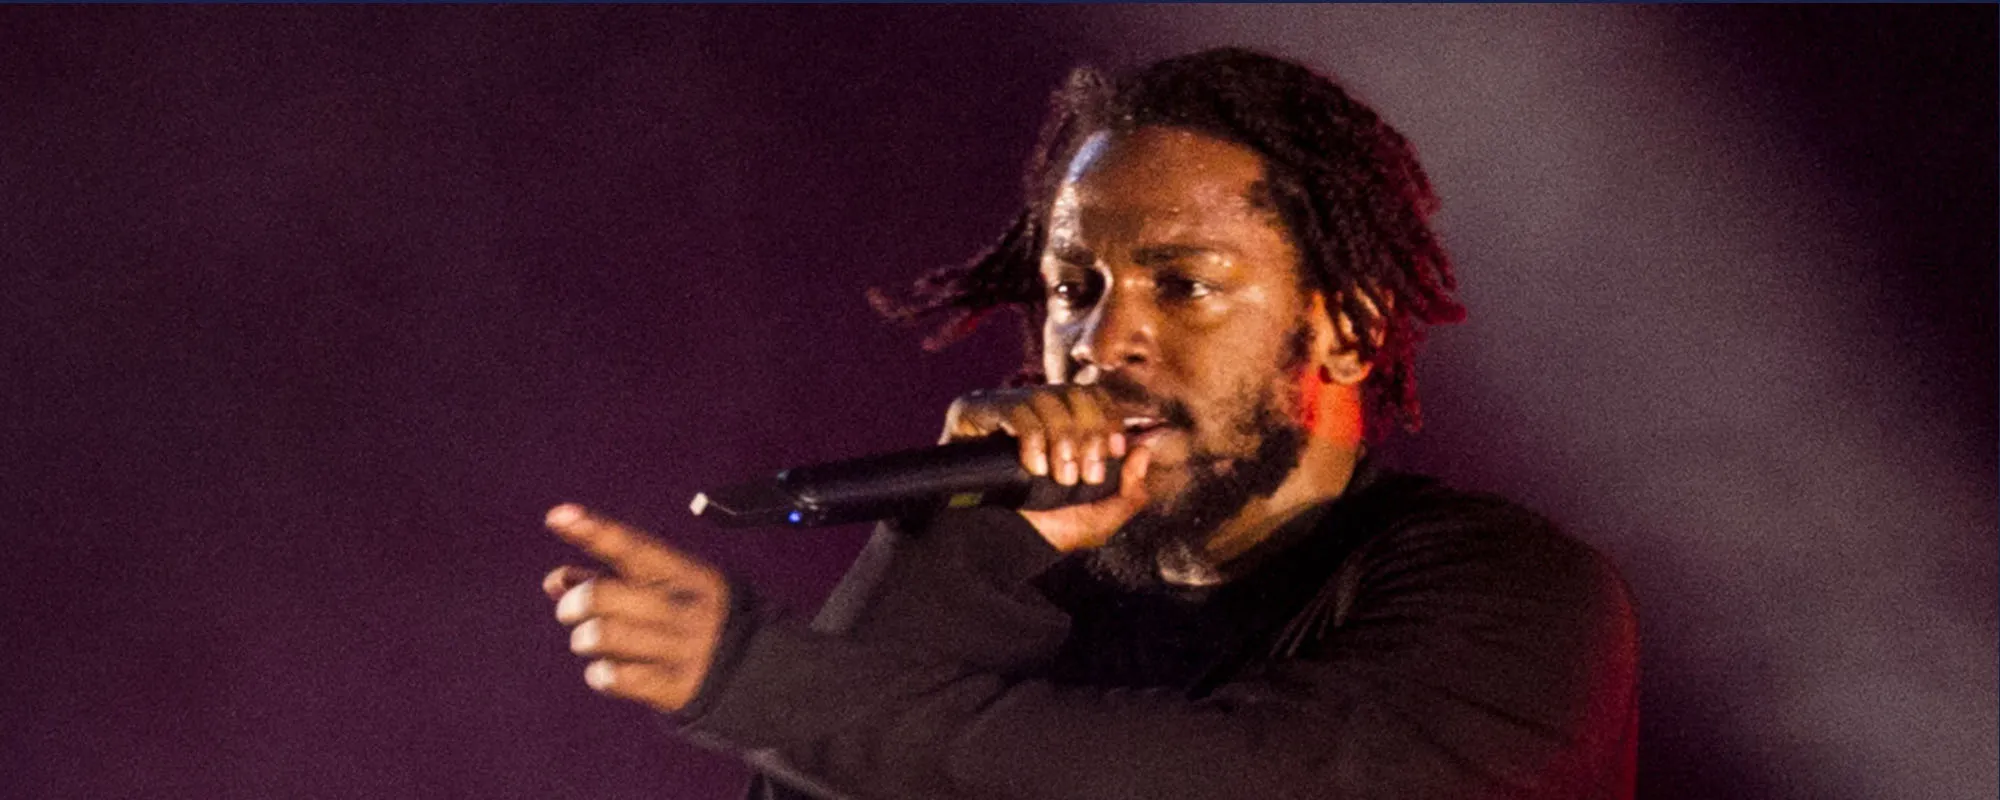 Kendrick Lamar Closes Glastonbury with Blood-Faced Plea: “Godspeed for Women’s Rights”